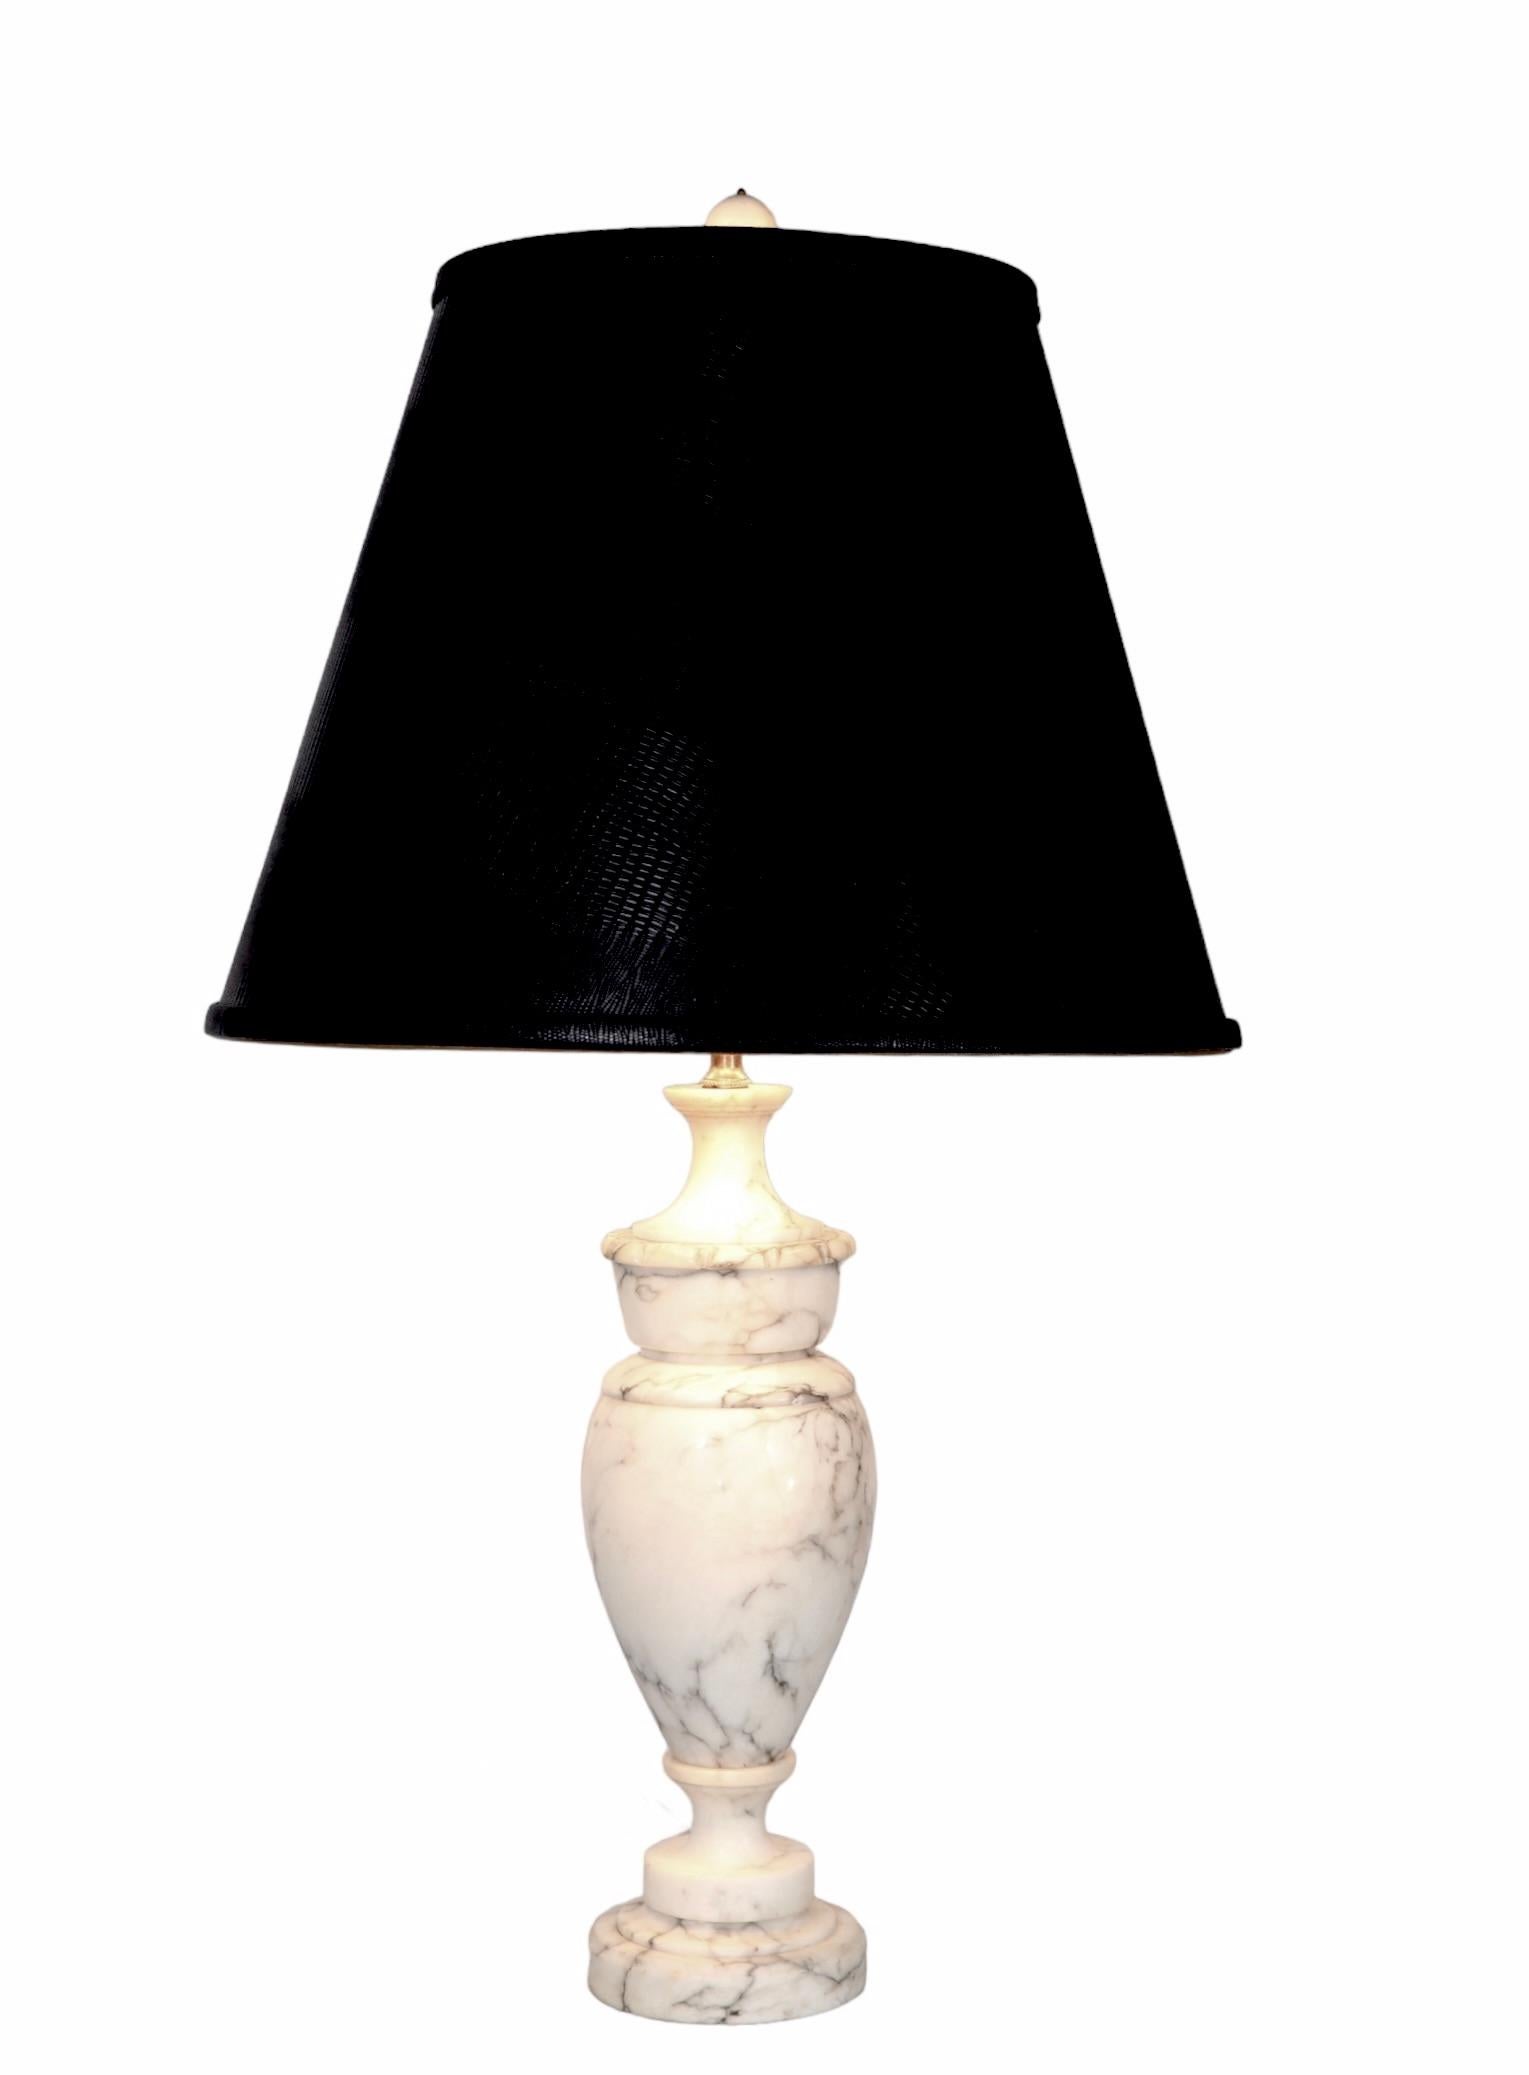 Chic Neo Classical, Hollywood Regency Italian carved marble, or possibly alabaster, table lamp, in very good, original clean and working condition. Sophisticated restrained design, perfect for classical, traditional and modern interior spaces. 
